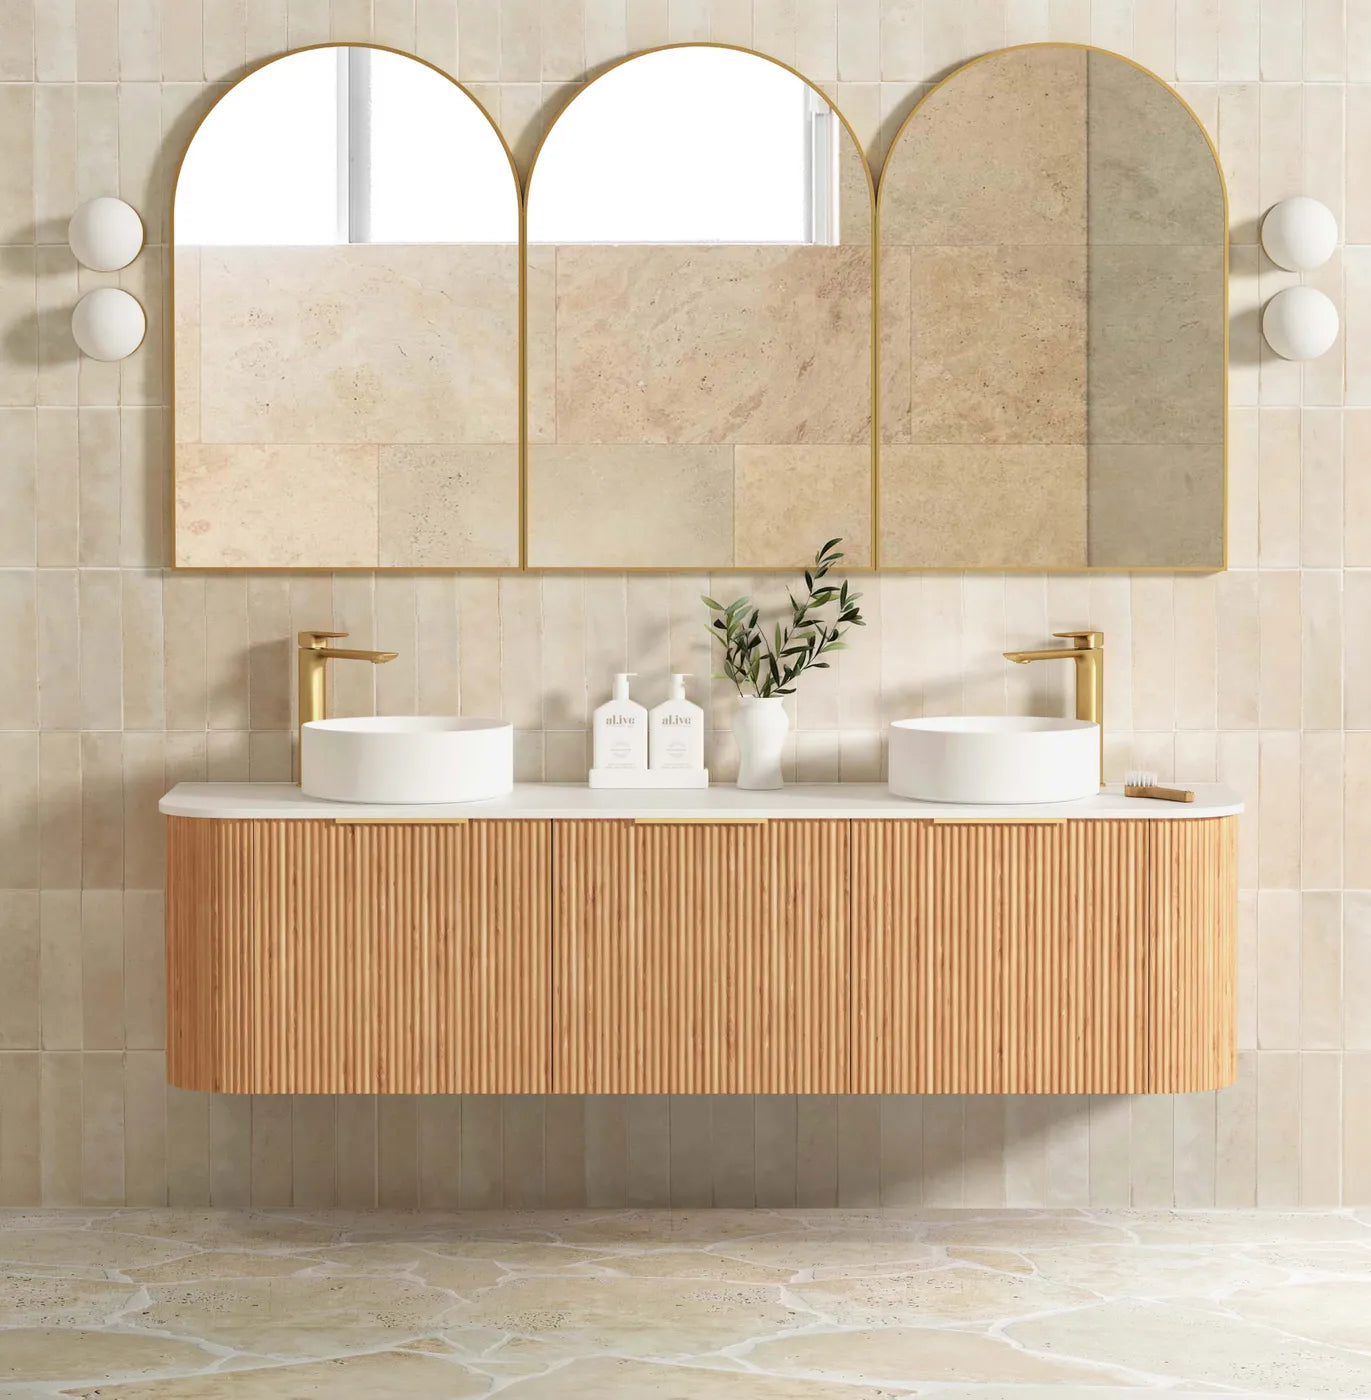 Achieving Elegance: 5 Ways to Make Your Bathroom Look More Expensive